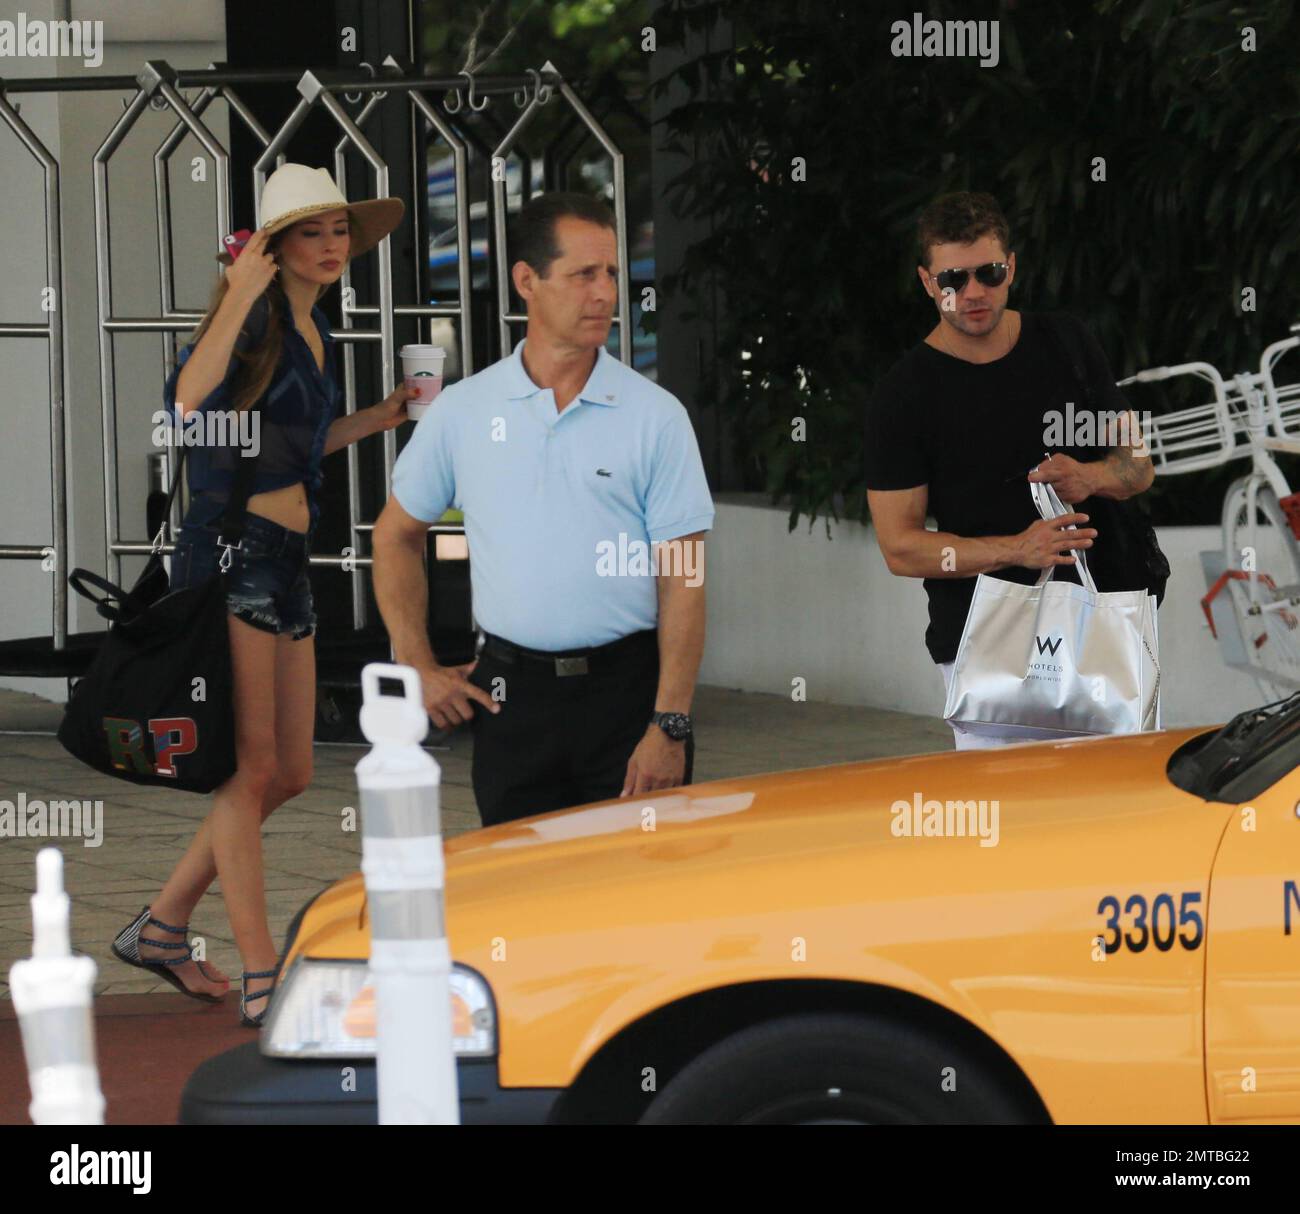 Ryan Phillippe and Paulina Slagter get in a taxi as they head out on the town for an afternoon in South Beach. Miami Beach, FL. 13th June 2014. Stock Photo